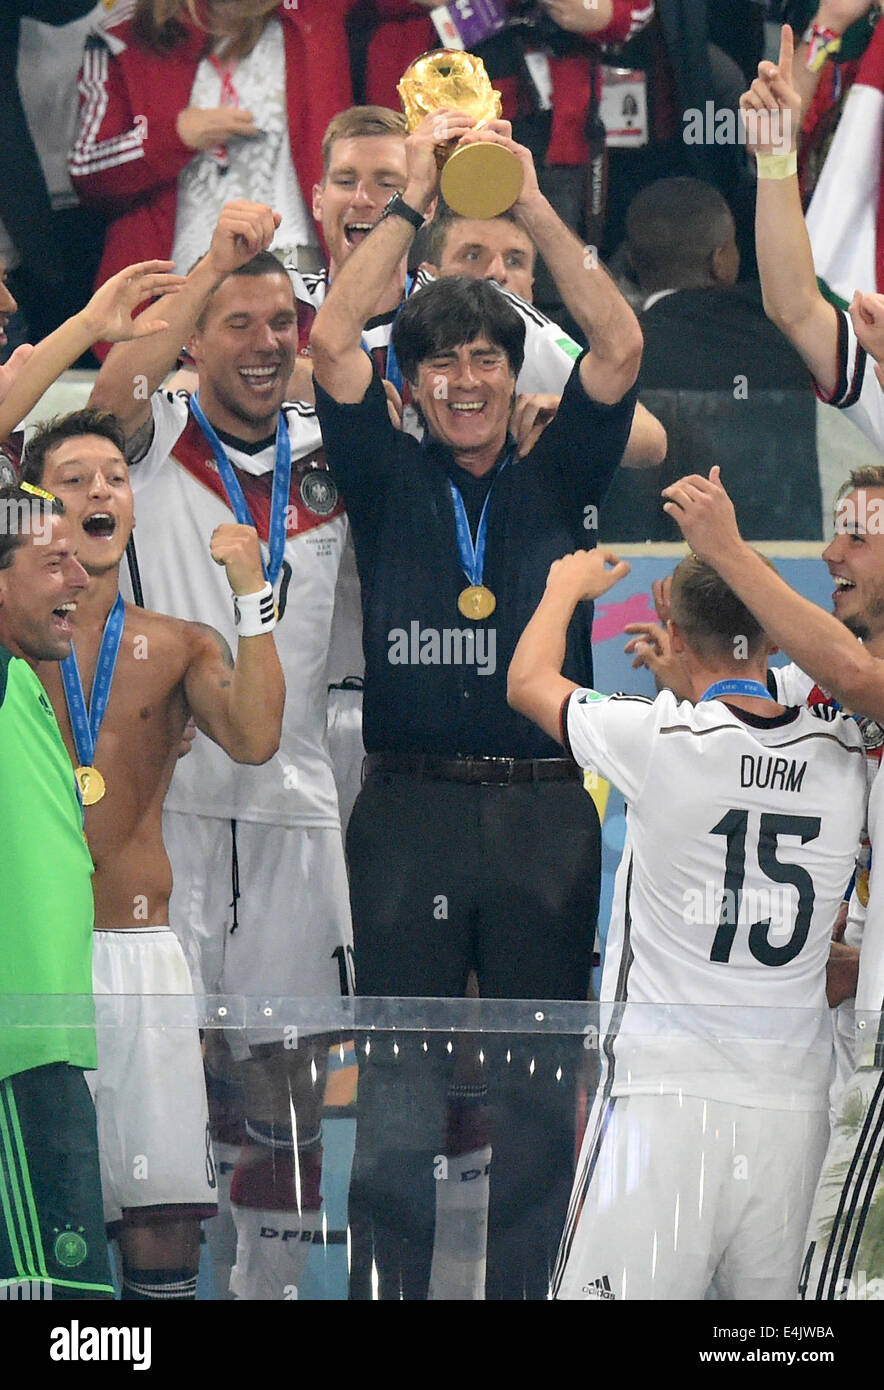 Rio de Janeiro, Brazil. 13th July, 2014. Head coach Joachim Loew (C) of Germany lifts up the World Cup trophy between his team after winning the FIFA World Cup 2014 final soccer match between Germany and Argentina at the Estadio do Maracana in Rio de Janeiro, Brazil, 13 July 2014. Photo: Marcus Brandt/dpa/Alamy Live News Stock Photo